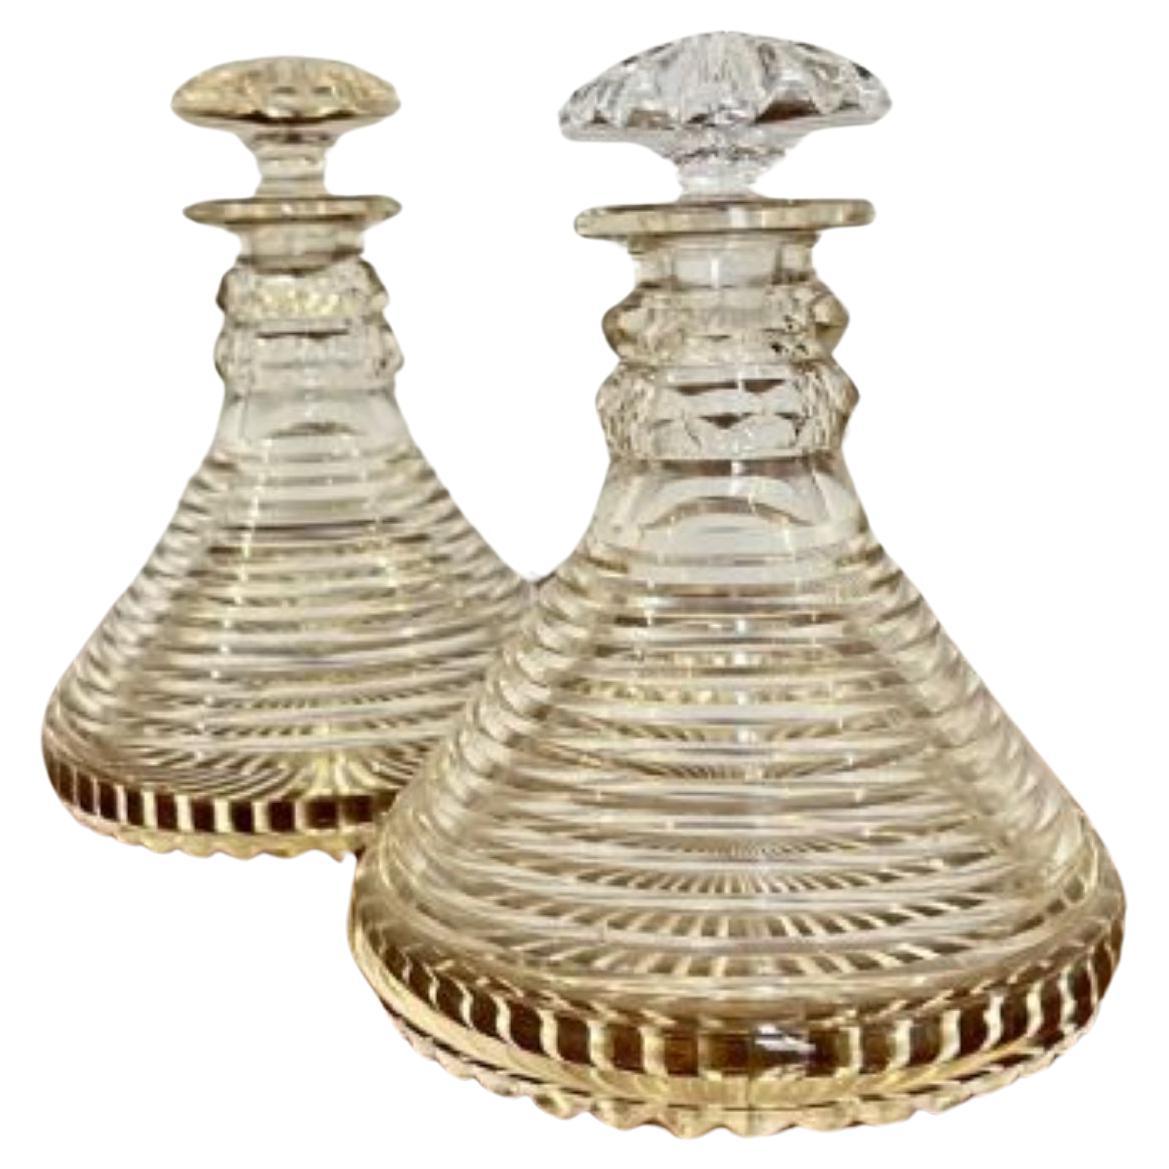 Unusual pair of quality George III cut glass ships decanters 